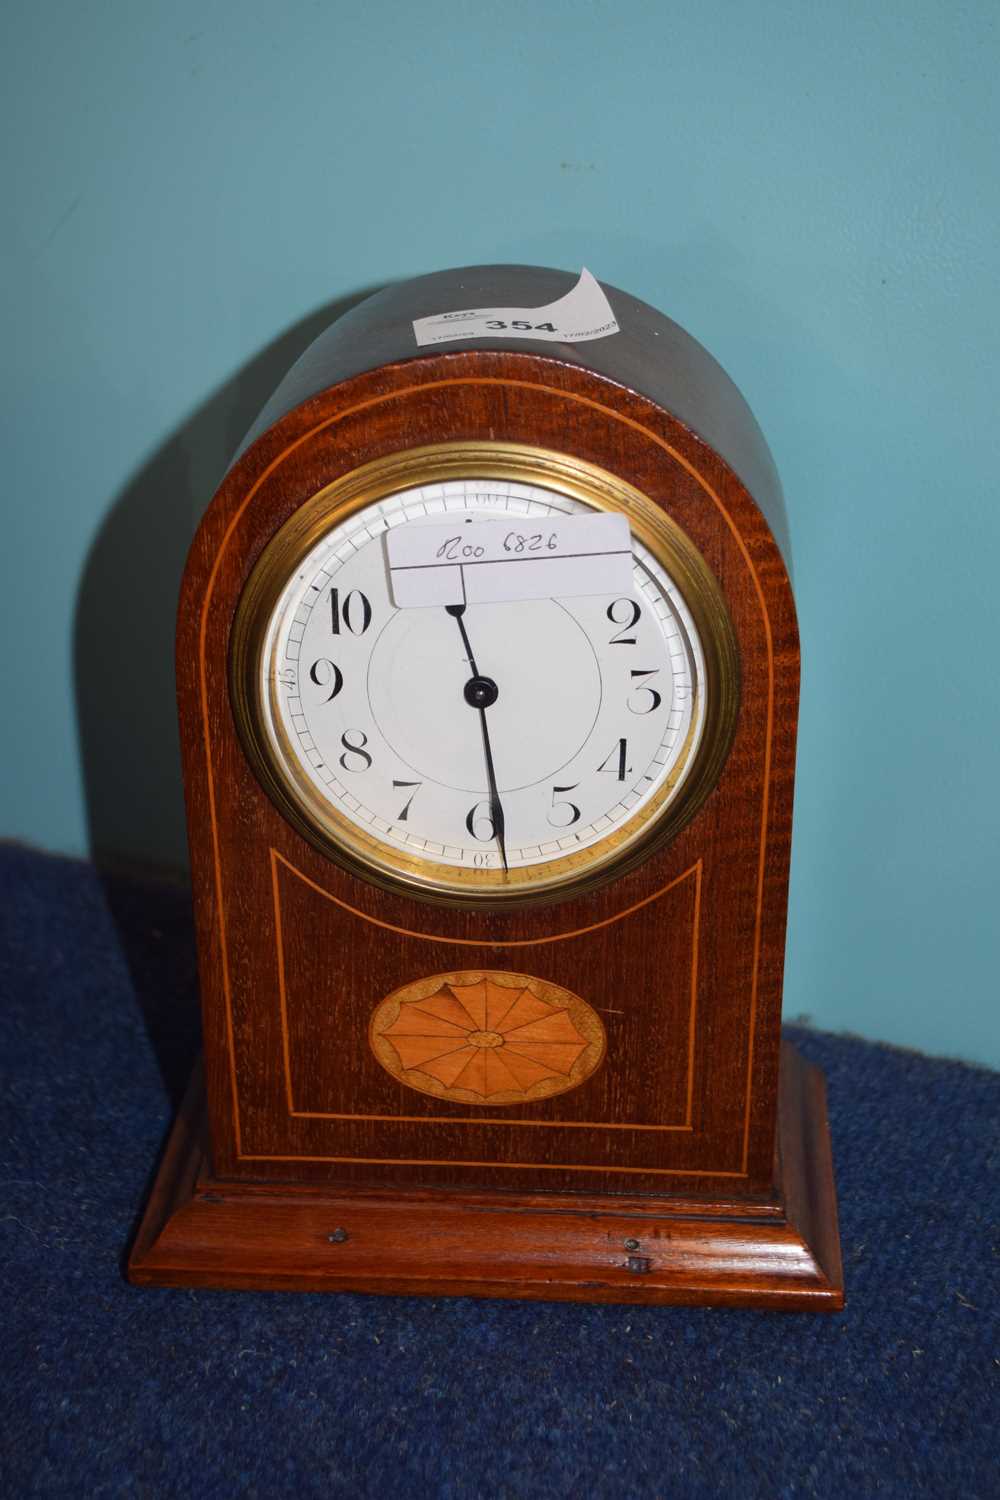 Edwardian mantel clock with inlay decoration, the Swiss made movement marked Buren